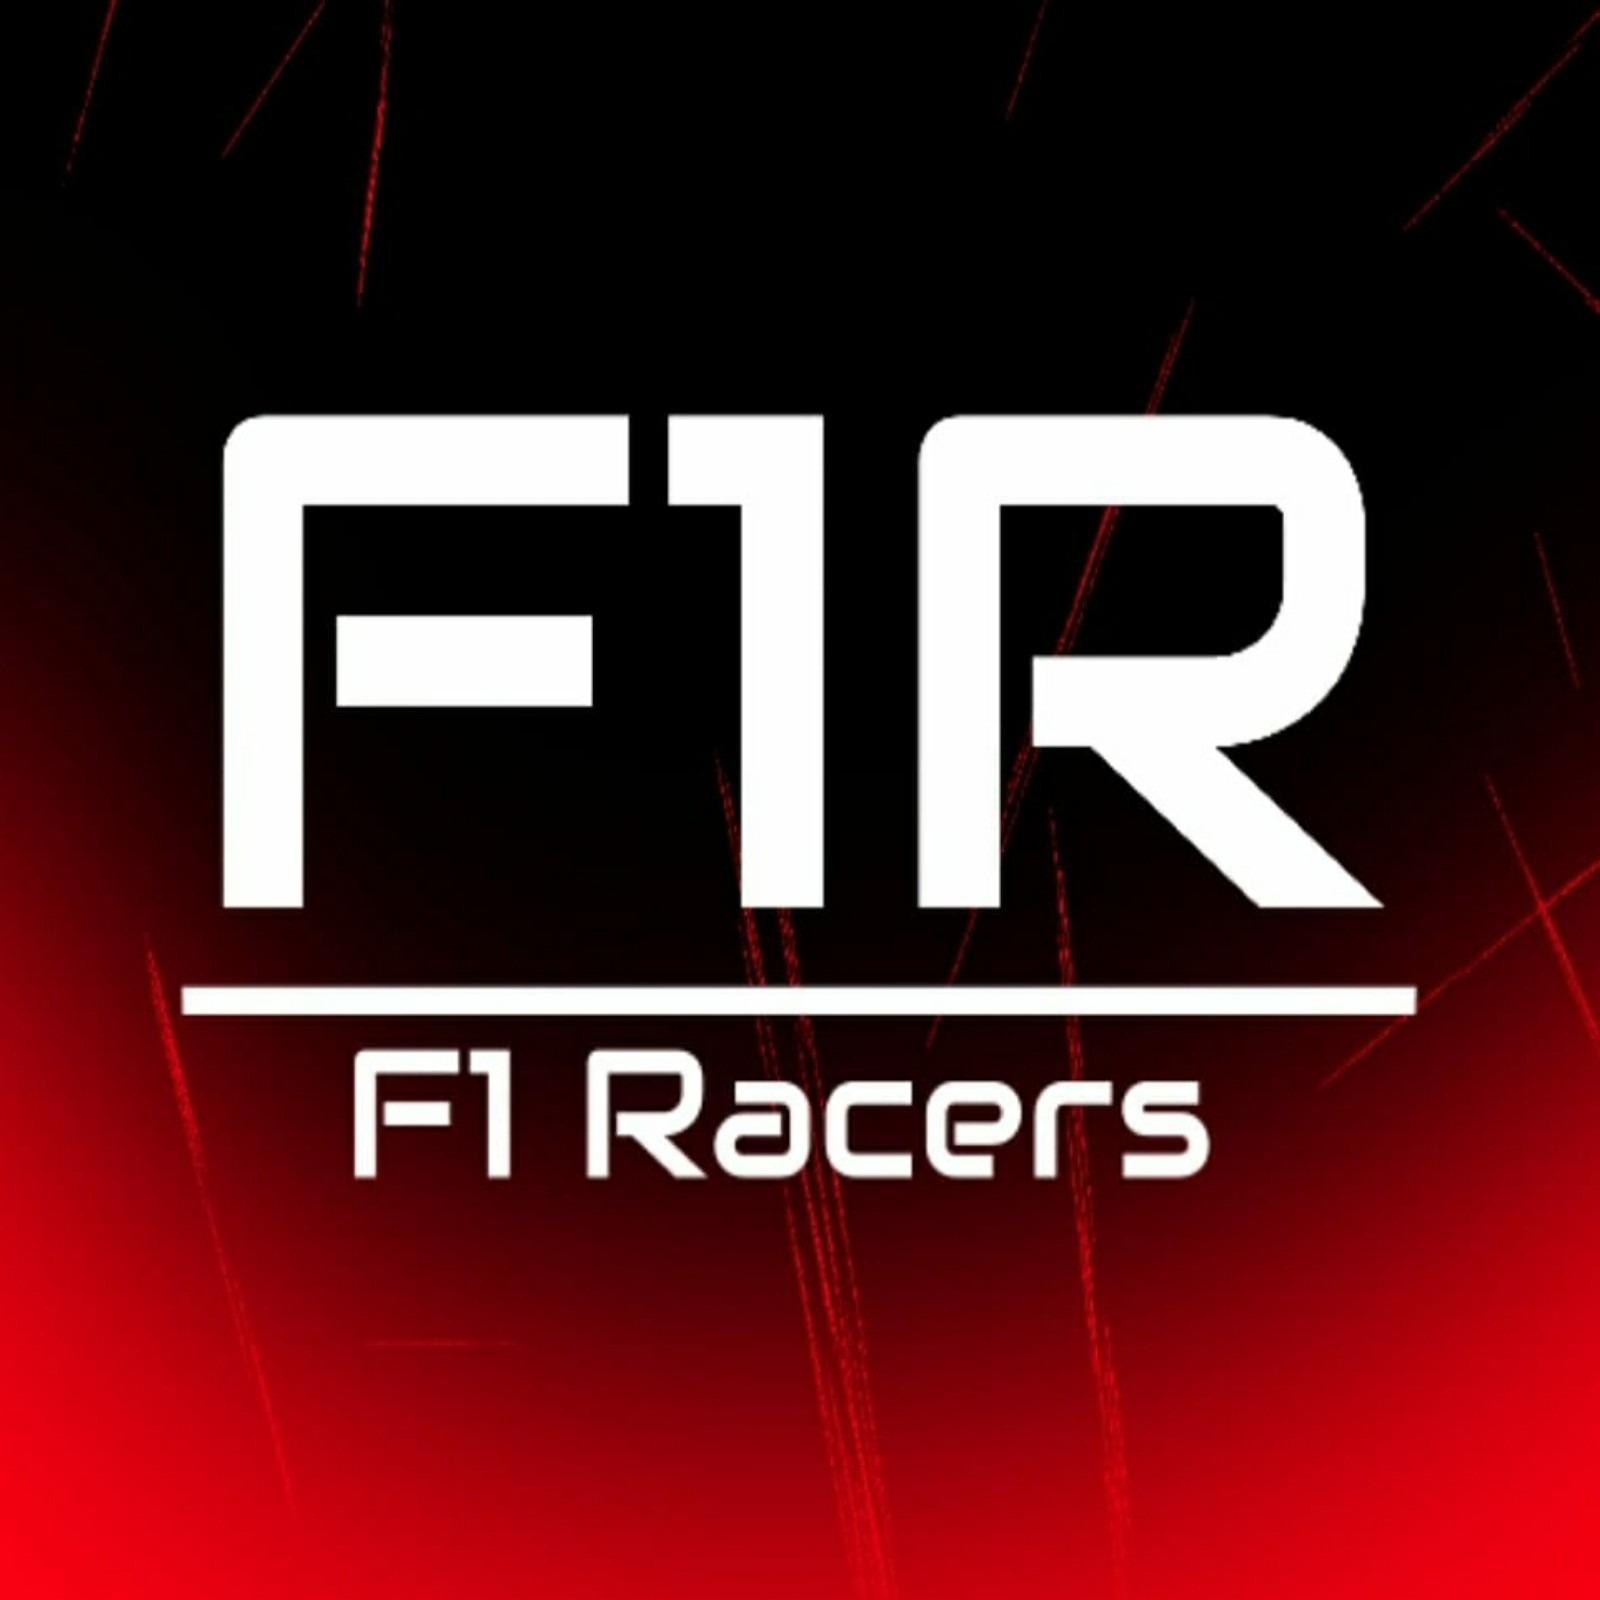 The f1racers Podcast